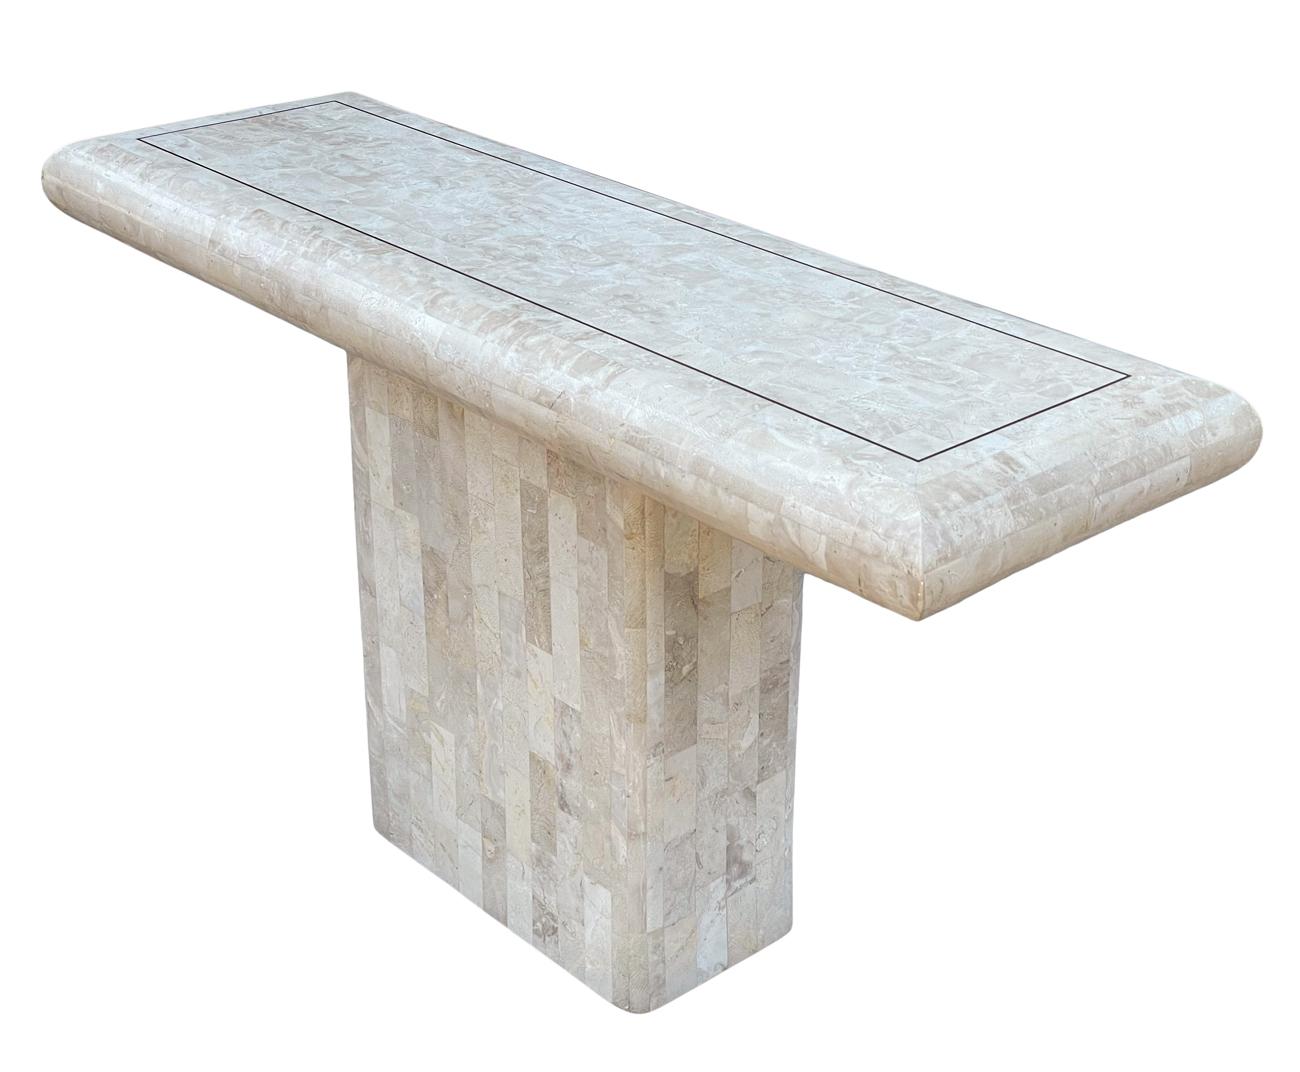 Hollywood Regency Tessellated Stone or White Marble Console Table or Sofa Table In Good Condition For Sale In Philadelphia, PA